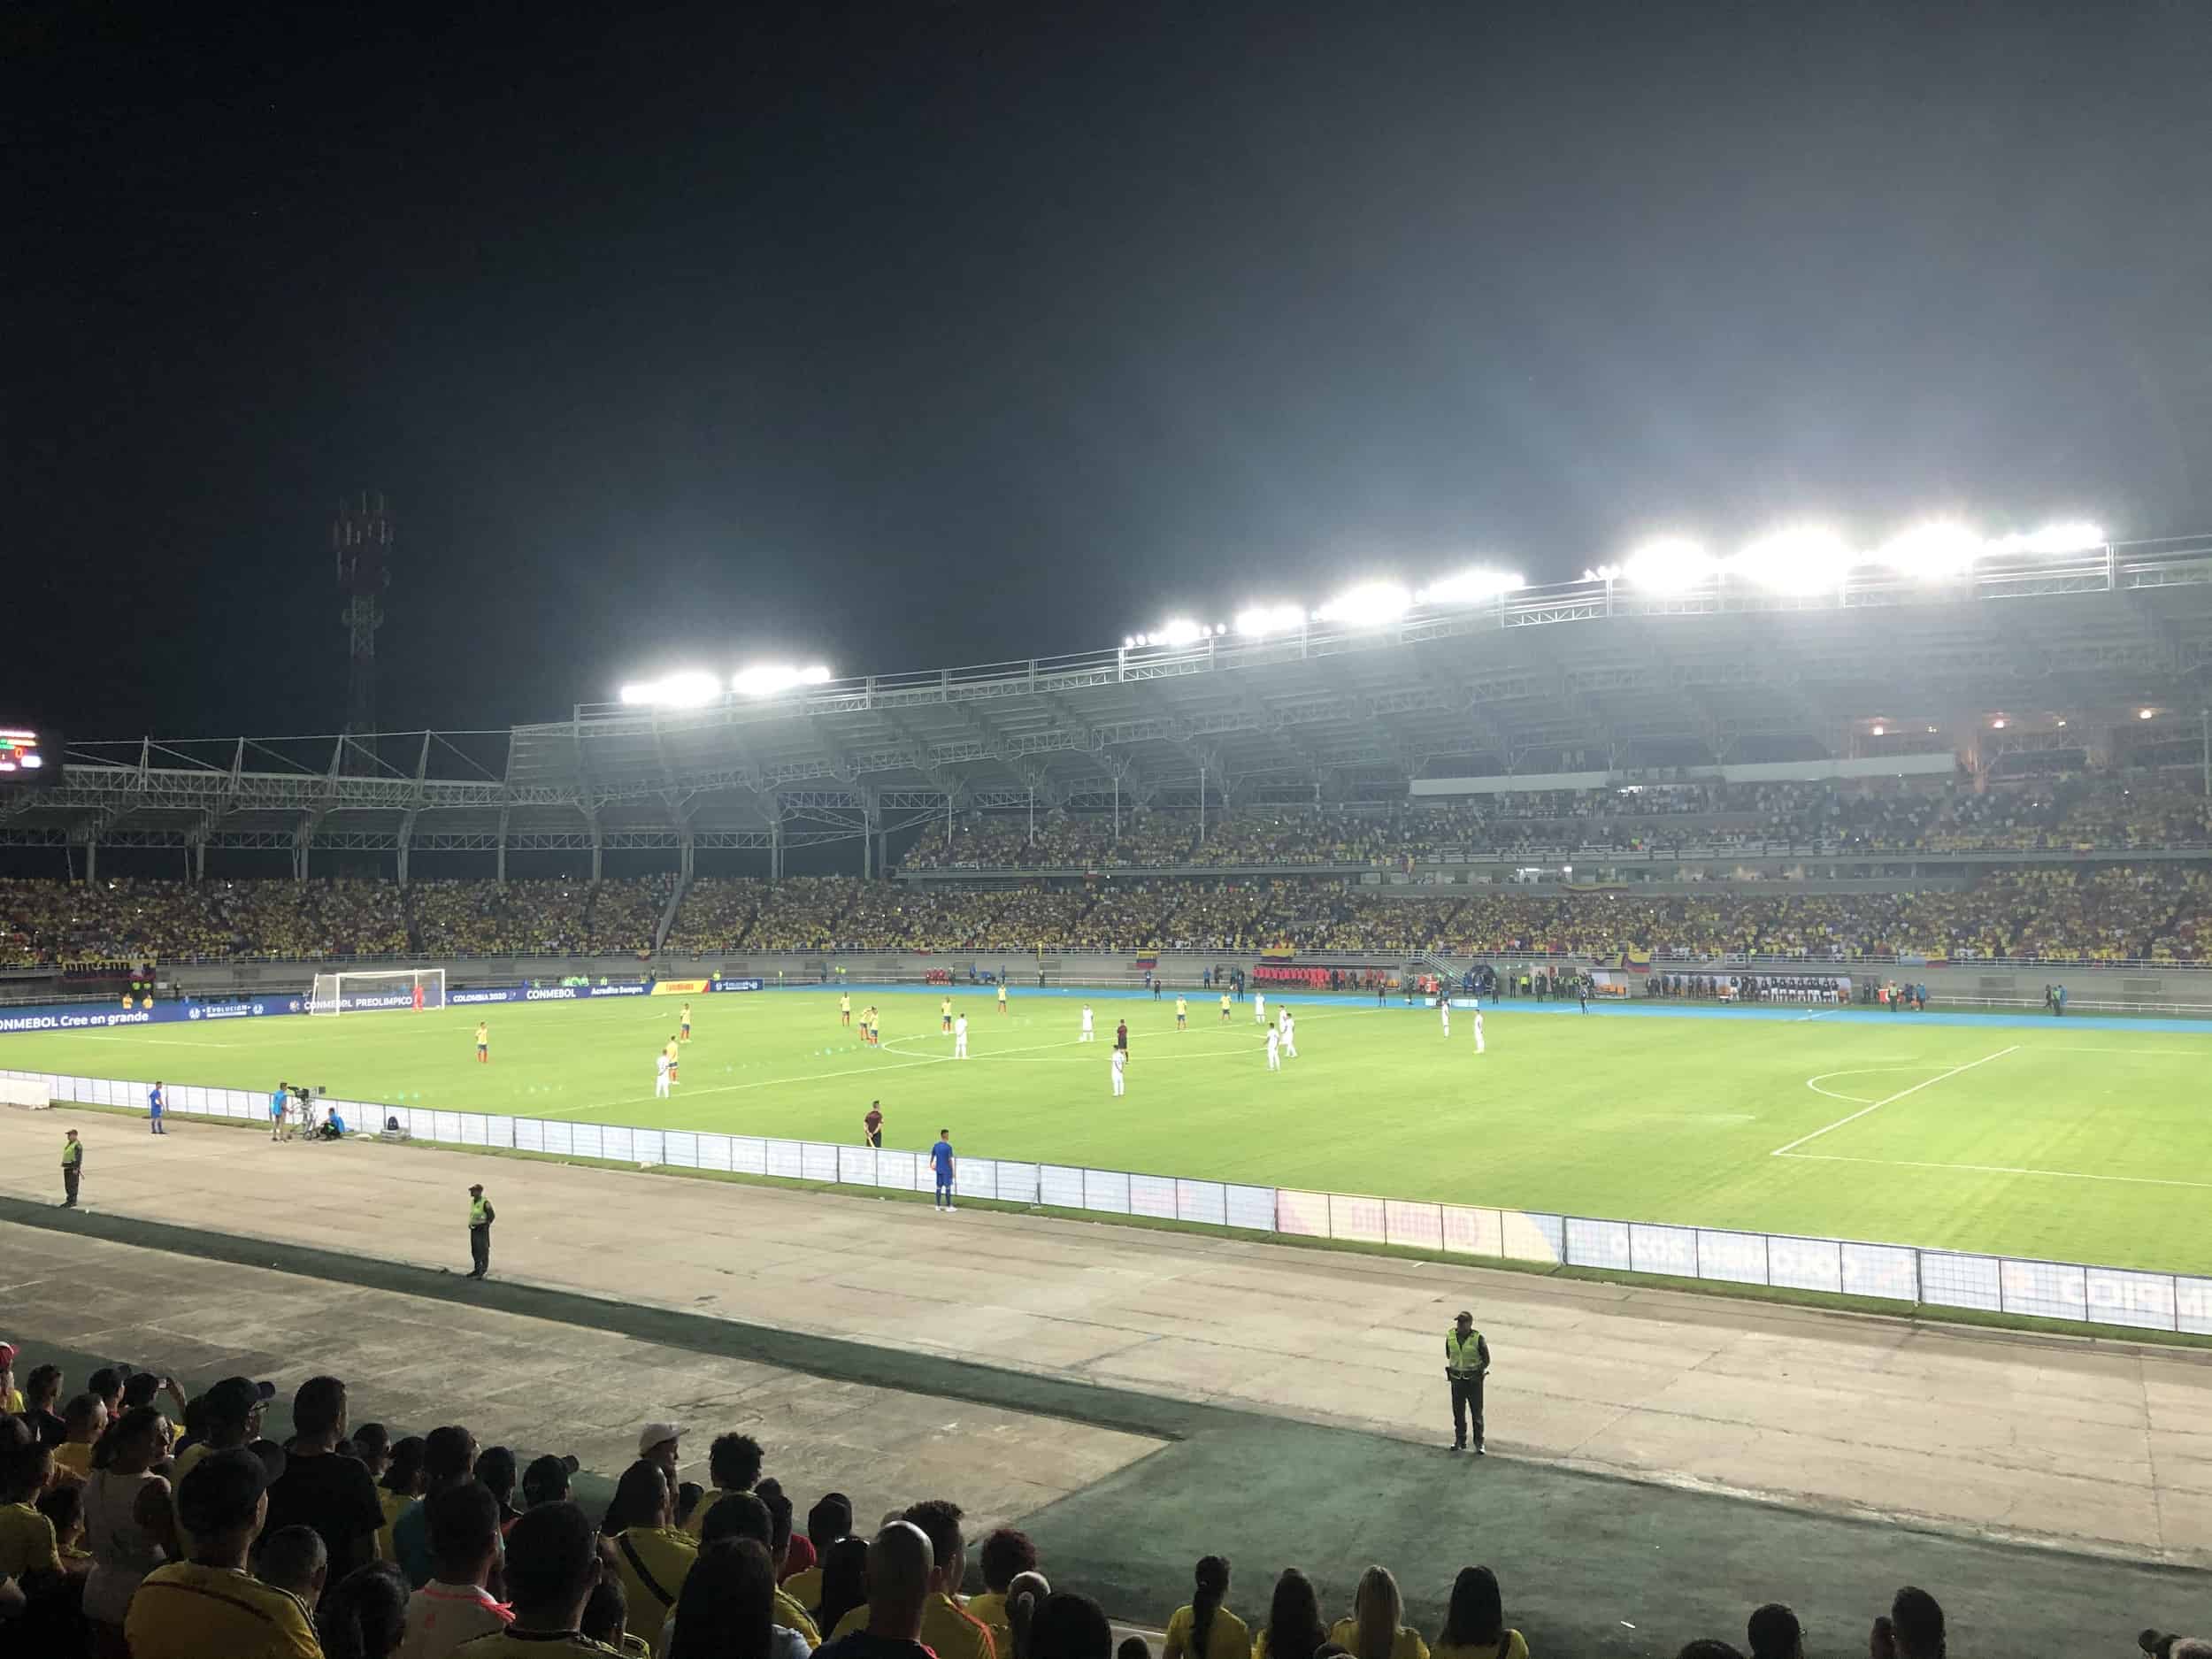 Colombia vs Argentina at the 2020 CONMEBOL Pre-Olympic Tournament in Pereira, Colombia